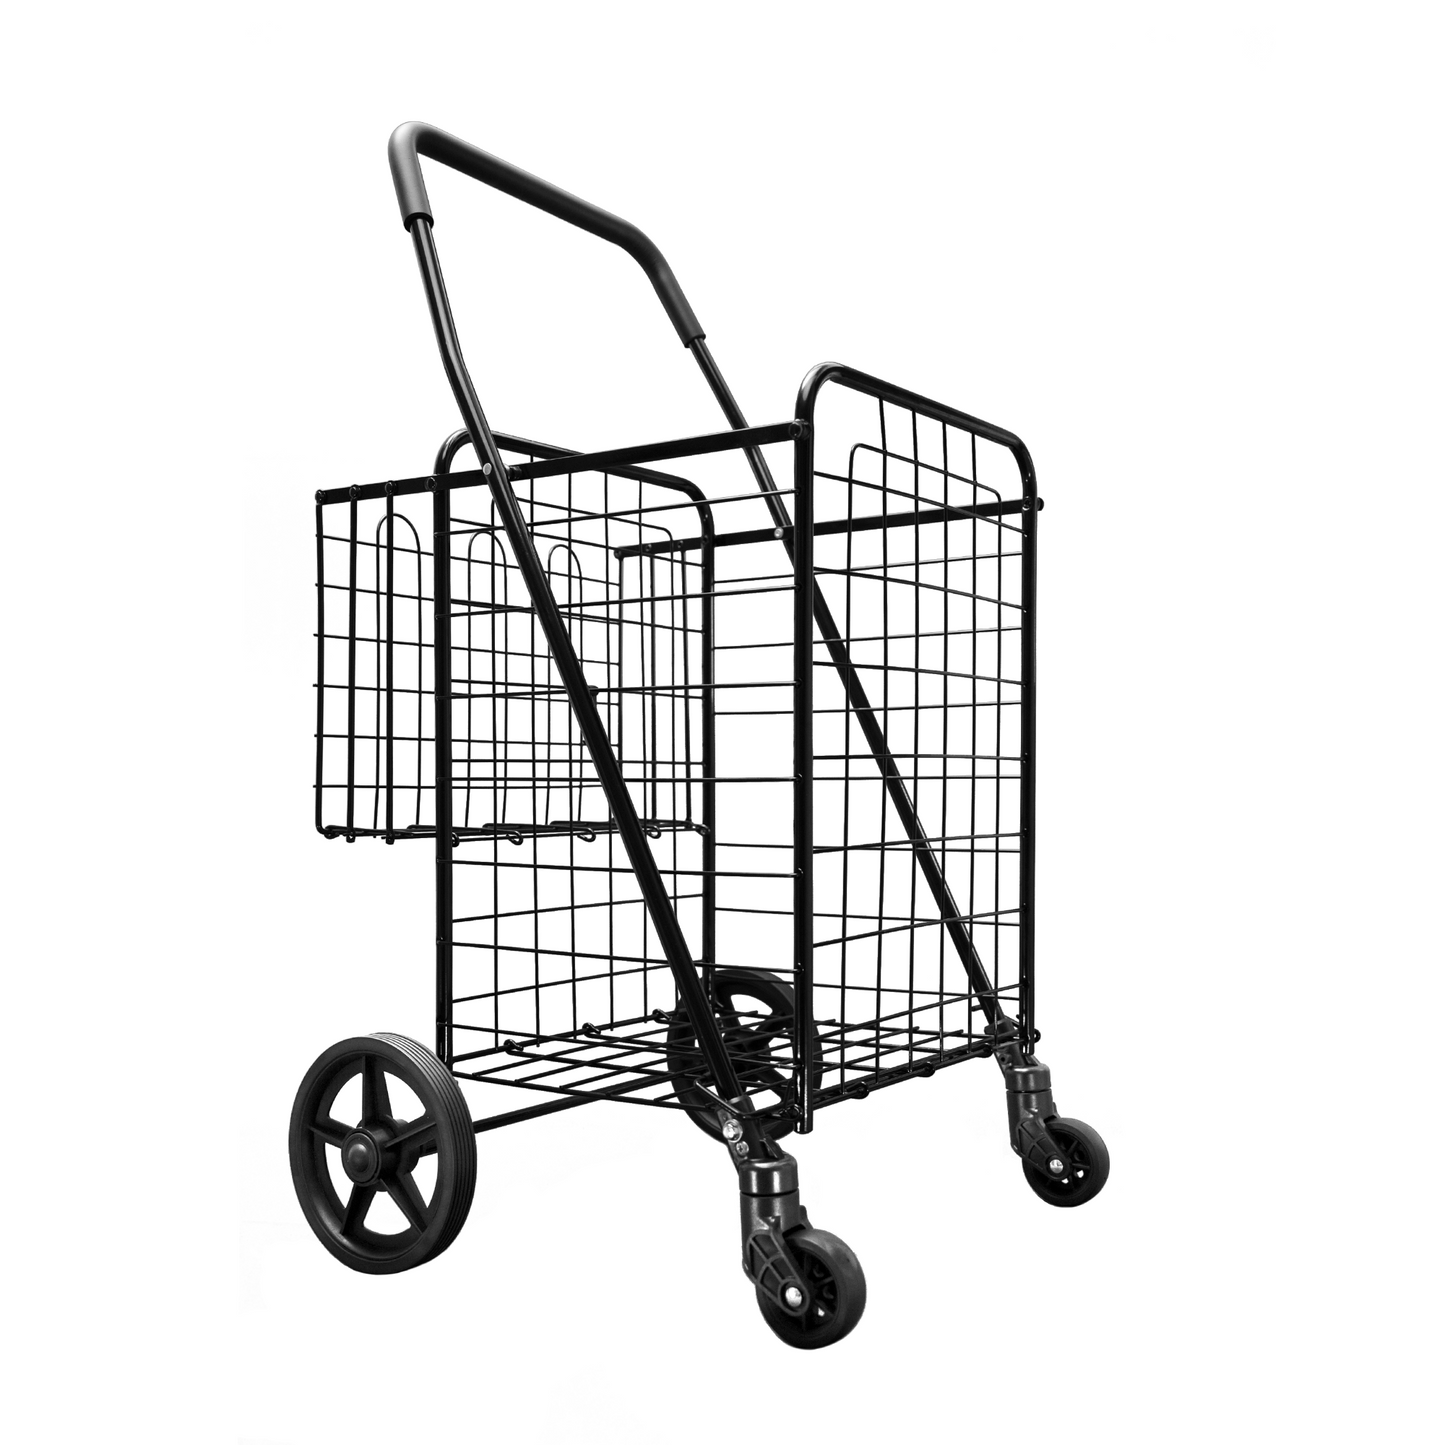 Folding Shopping Cart with Patent Pending Swivel Wheels and Double Basket, Large S-2081